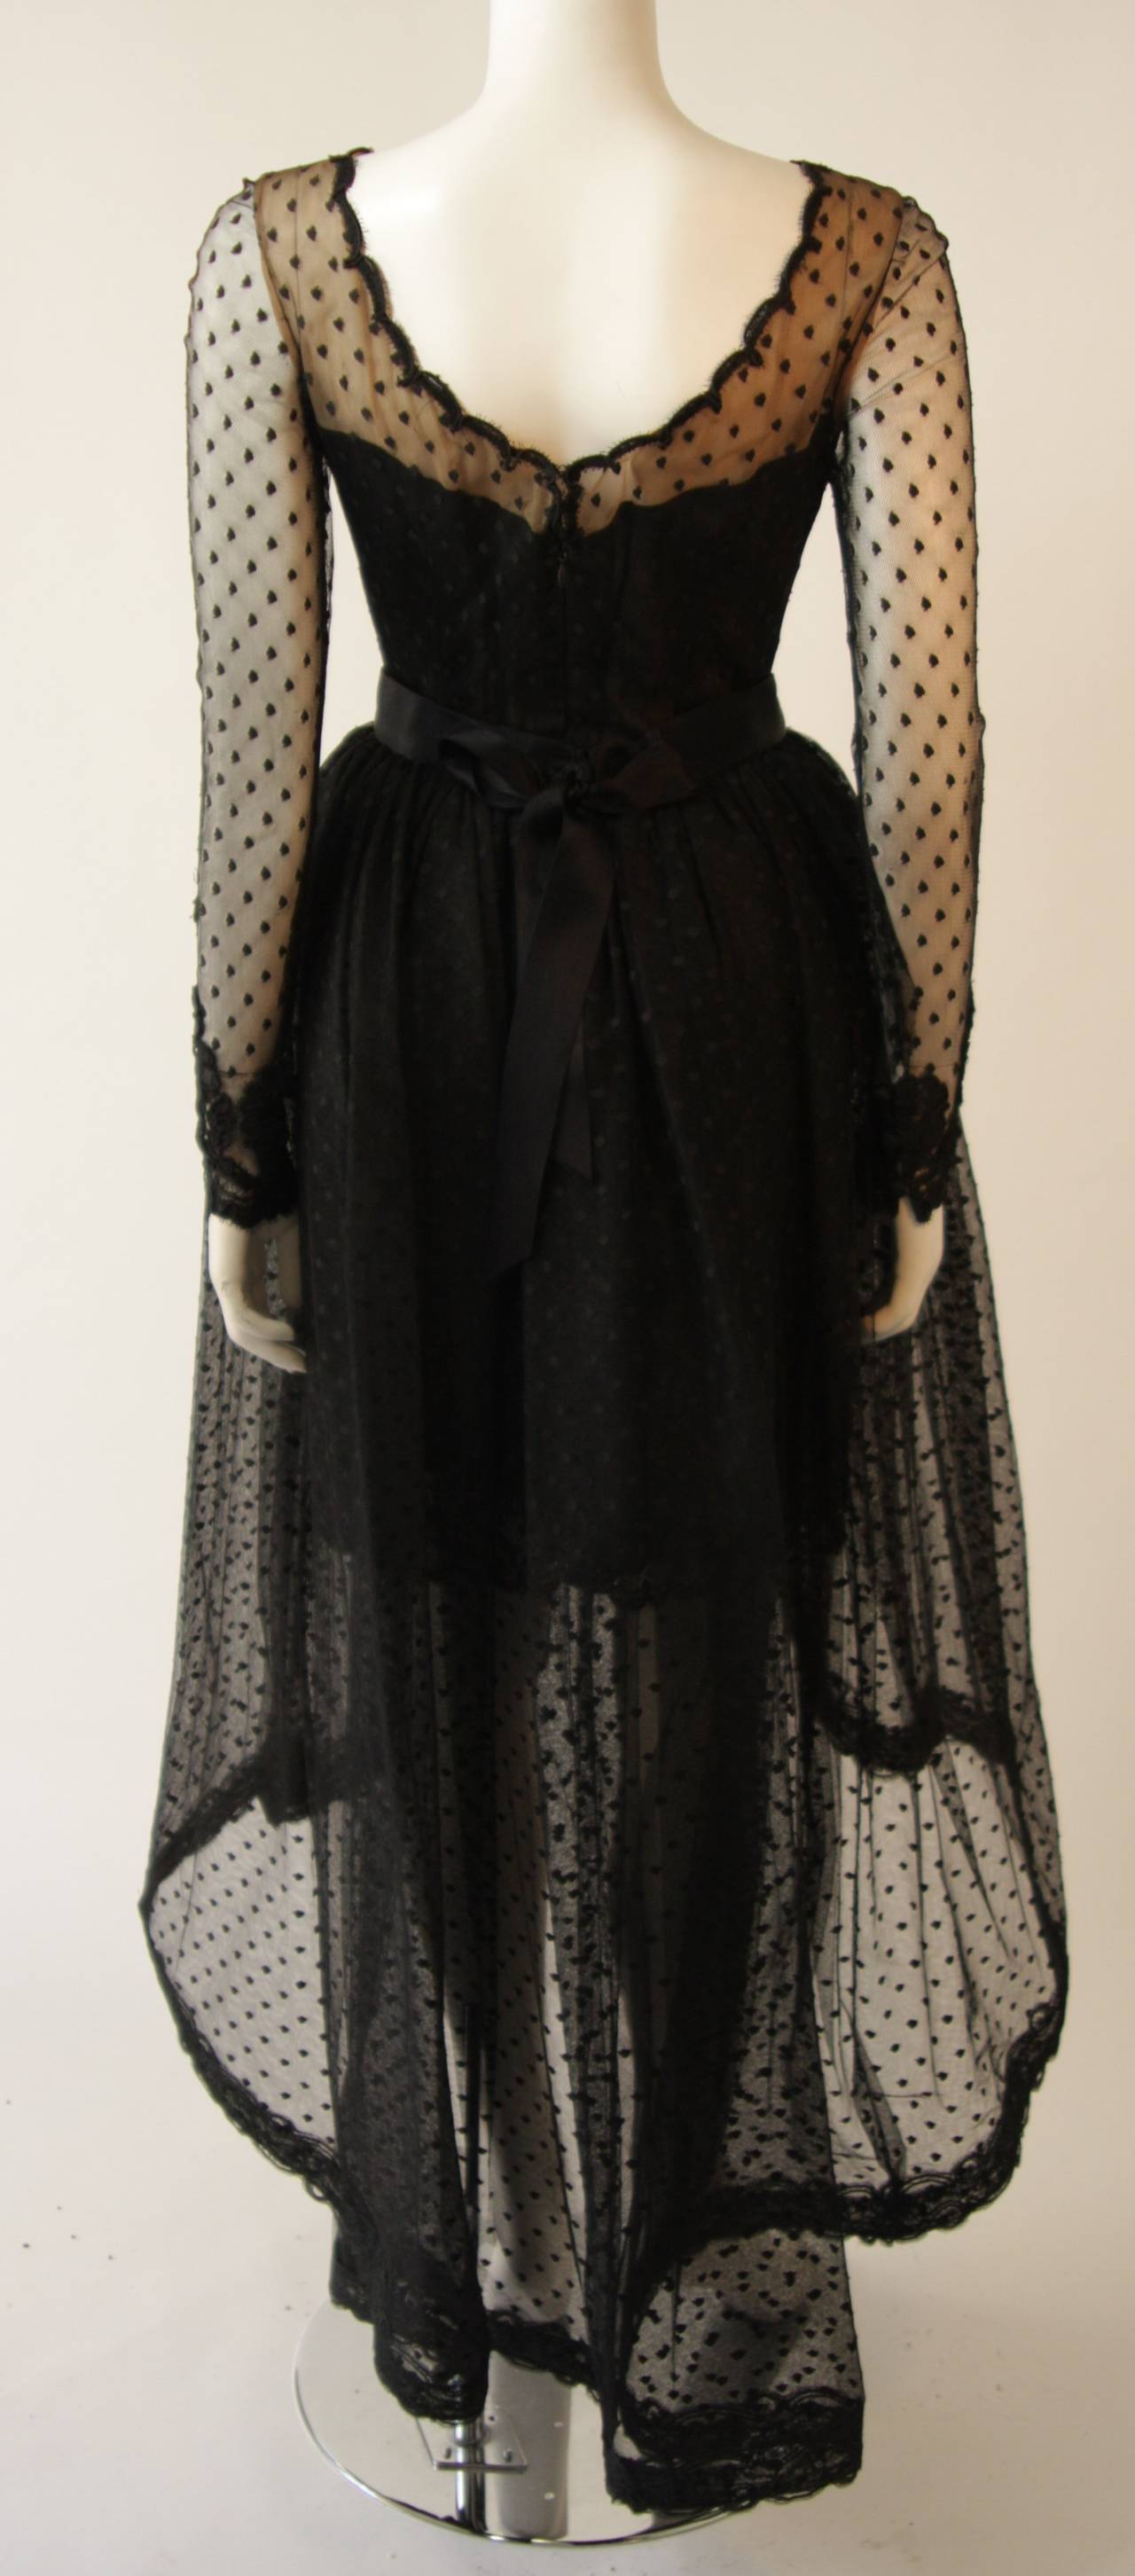 Bill Blass Black Polka Dot and Lace Cocktail Dress with Over-Skirt 3